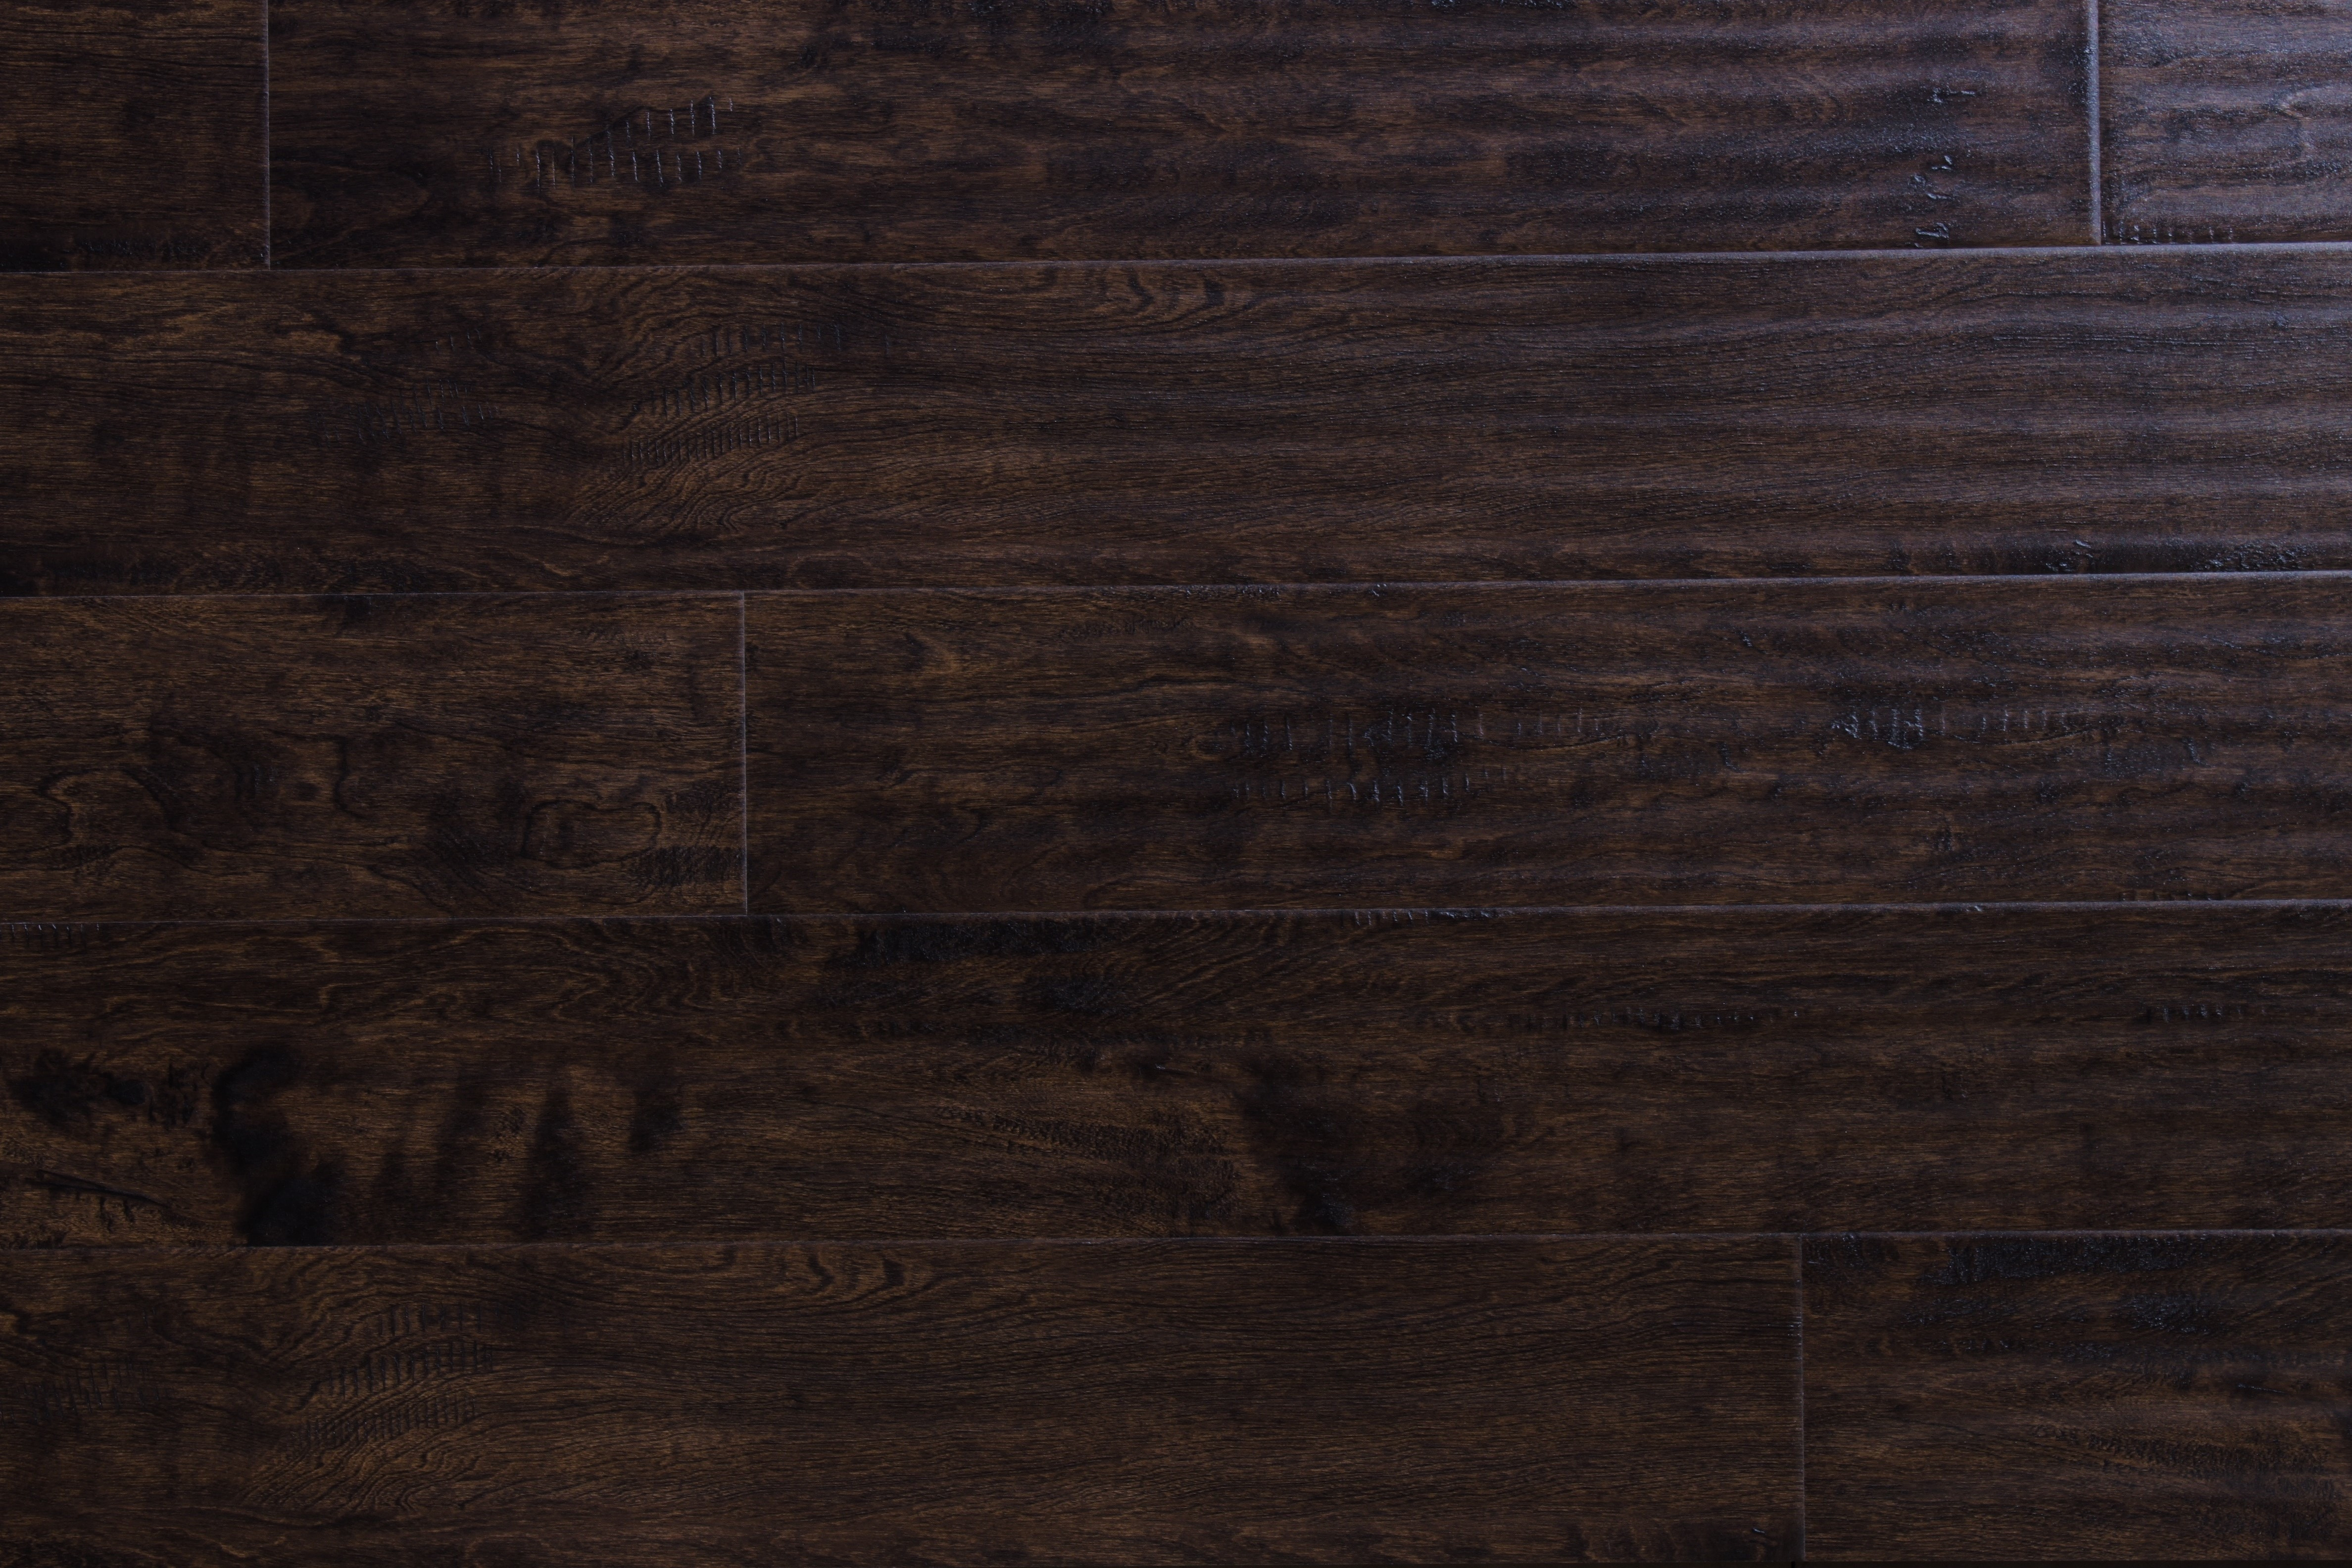 19 attractive Hardwood Flooring Kansas City 2024 free download hardwood flooring kansas city of wood flooring free samples available at builddirecta intended for tailor multi gb 5874277bb8d3c